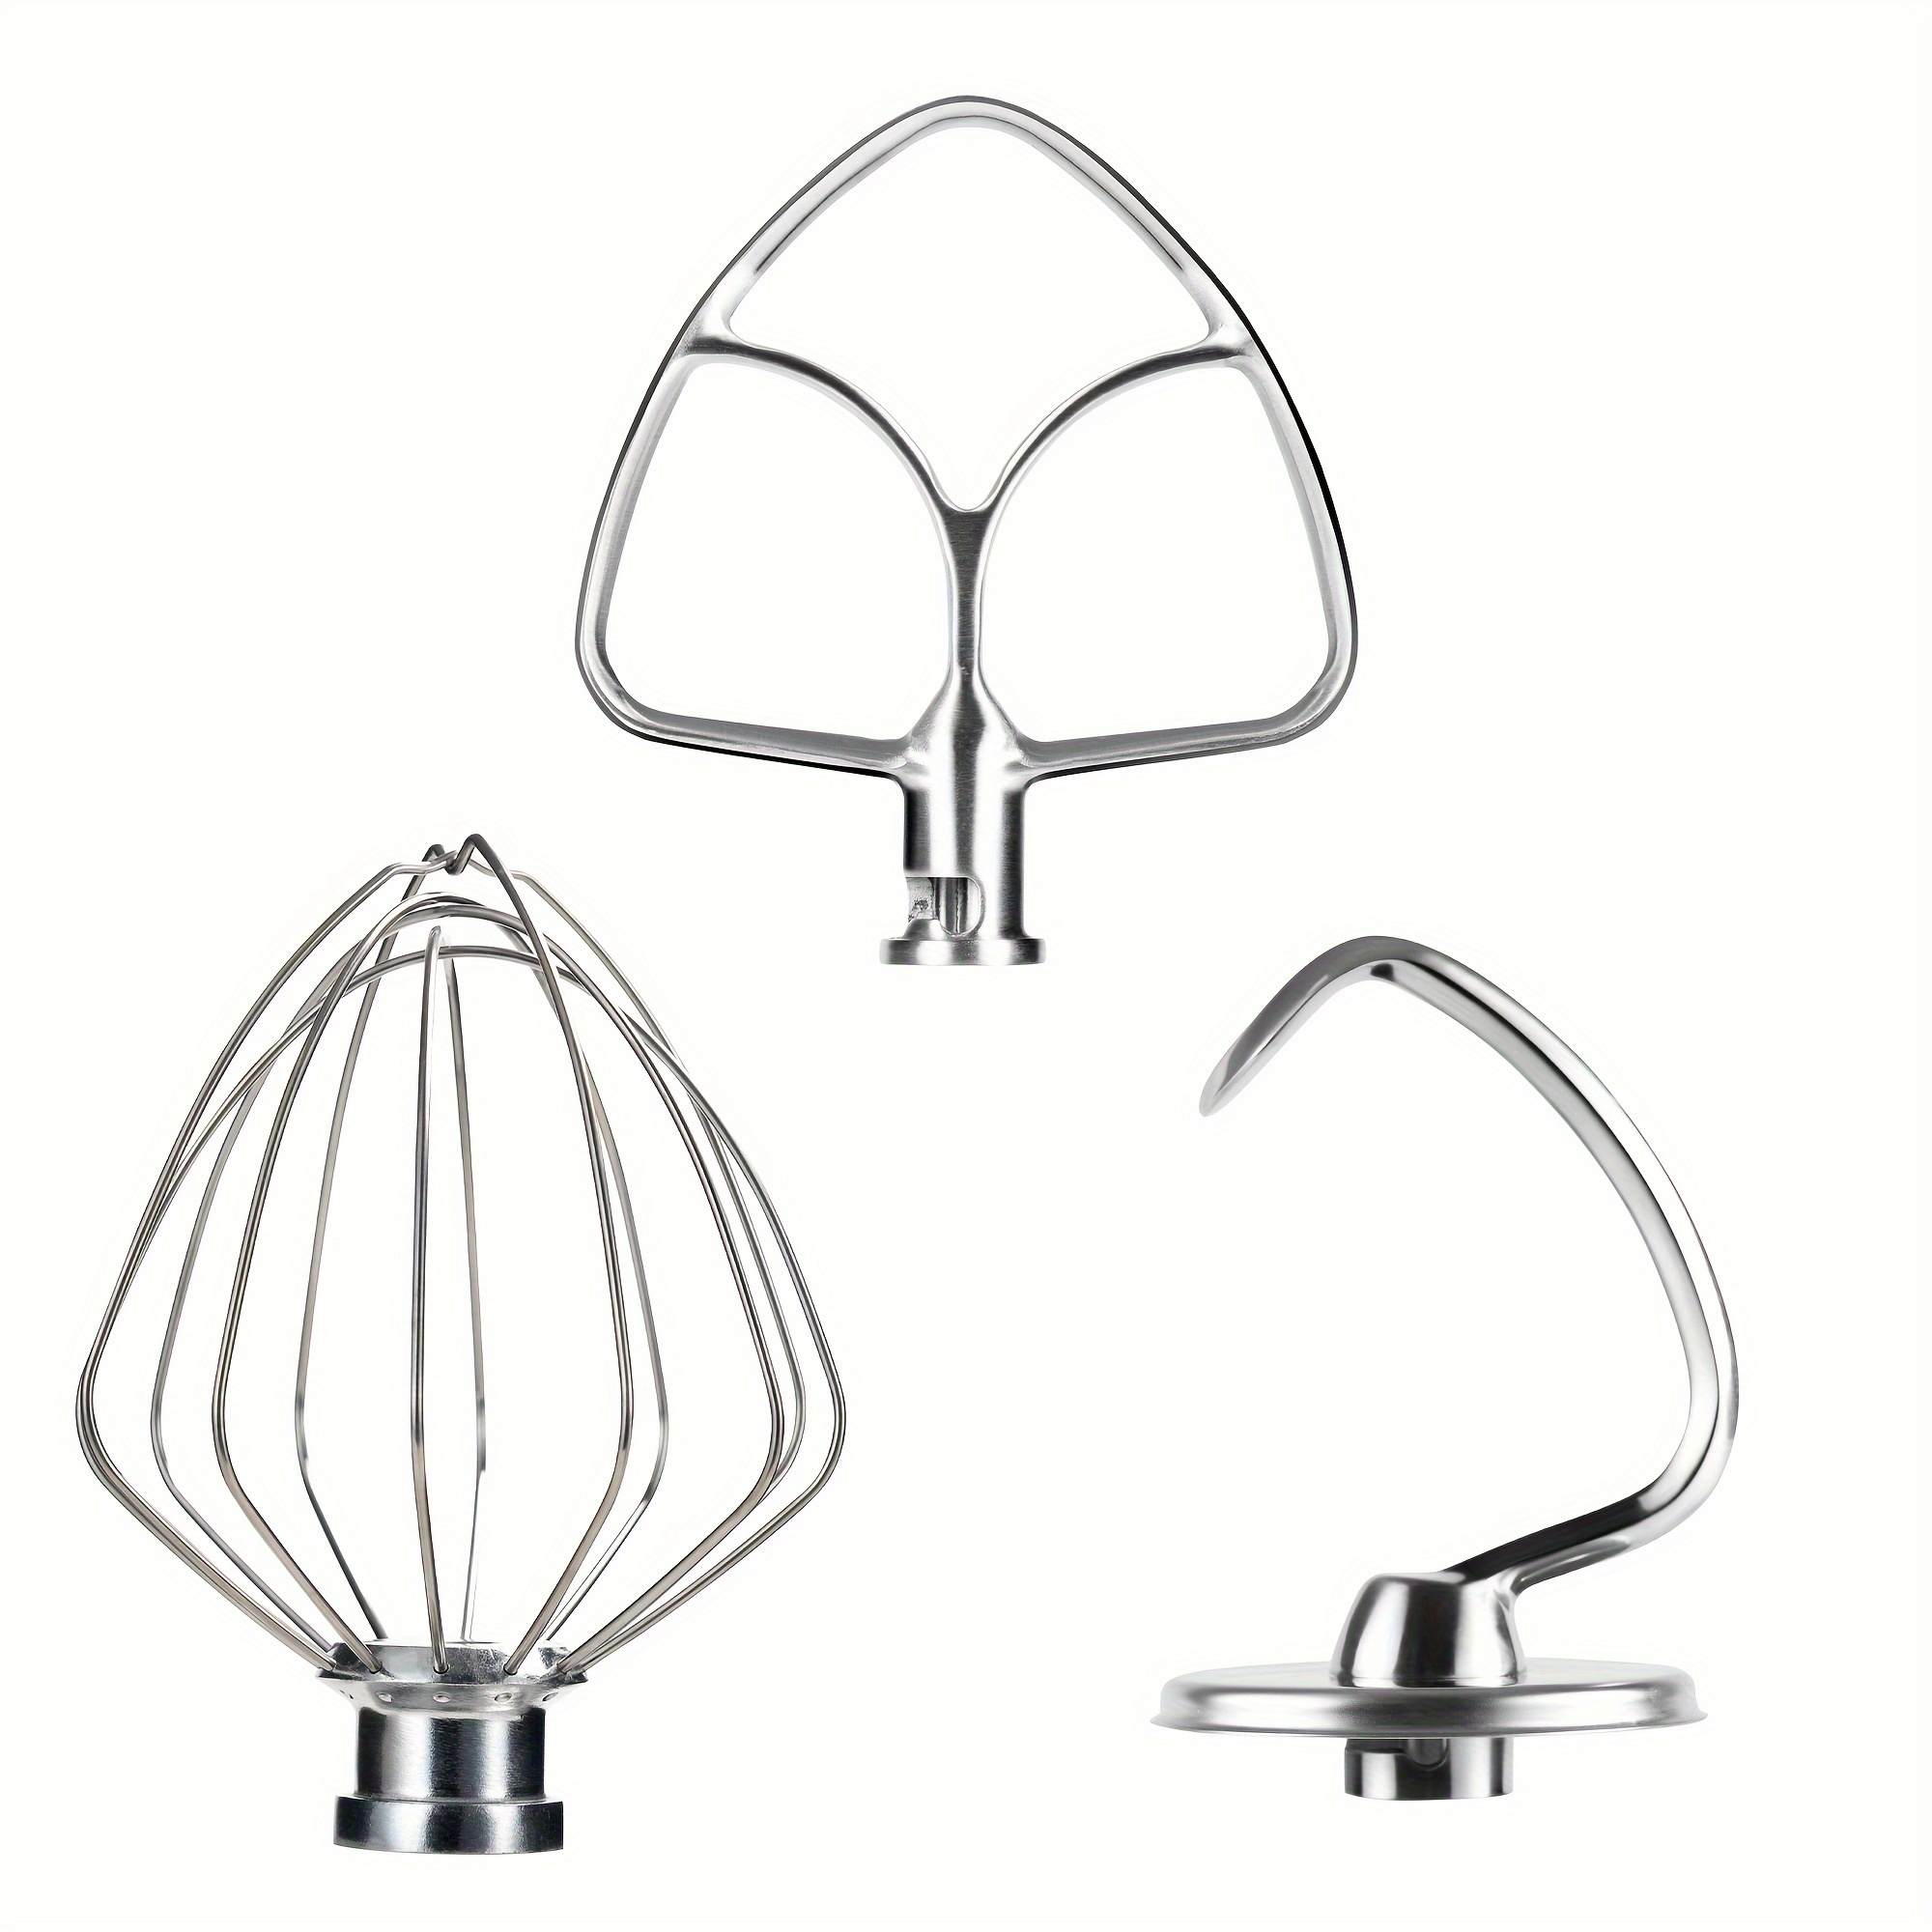 

Stainless Steel Mixing Paddle Mixing Net And Noodle Hook Set Of 3, - Dough Hook, Flat Whisk, Wire Whisk For Kitchen Treasure 4.5-5qt Stand Mixer K45ss, Ksm75, Ksm90, Ksm95, Ksm150